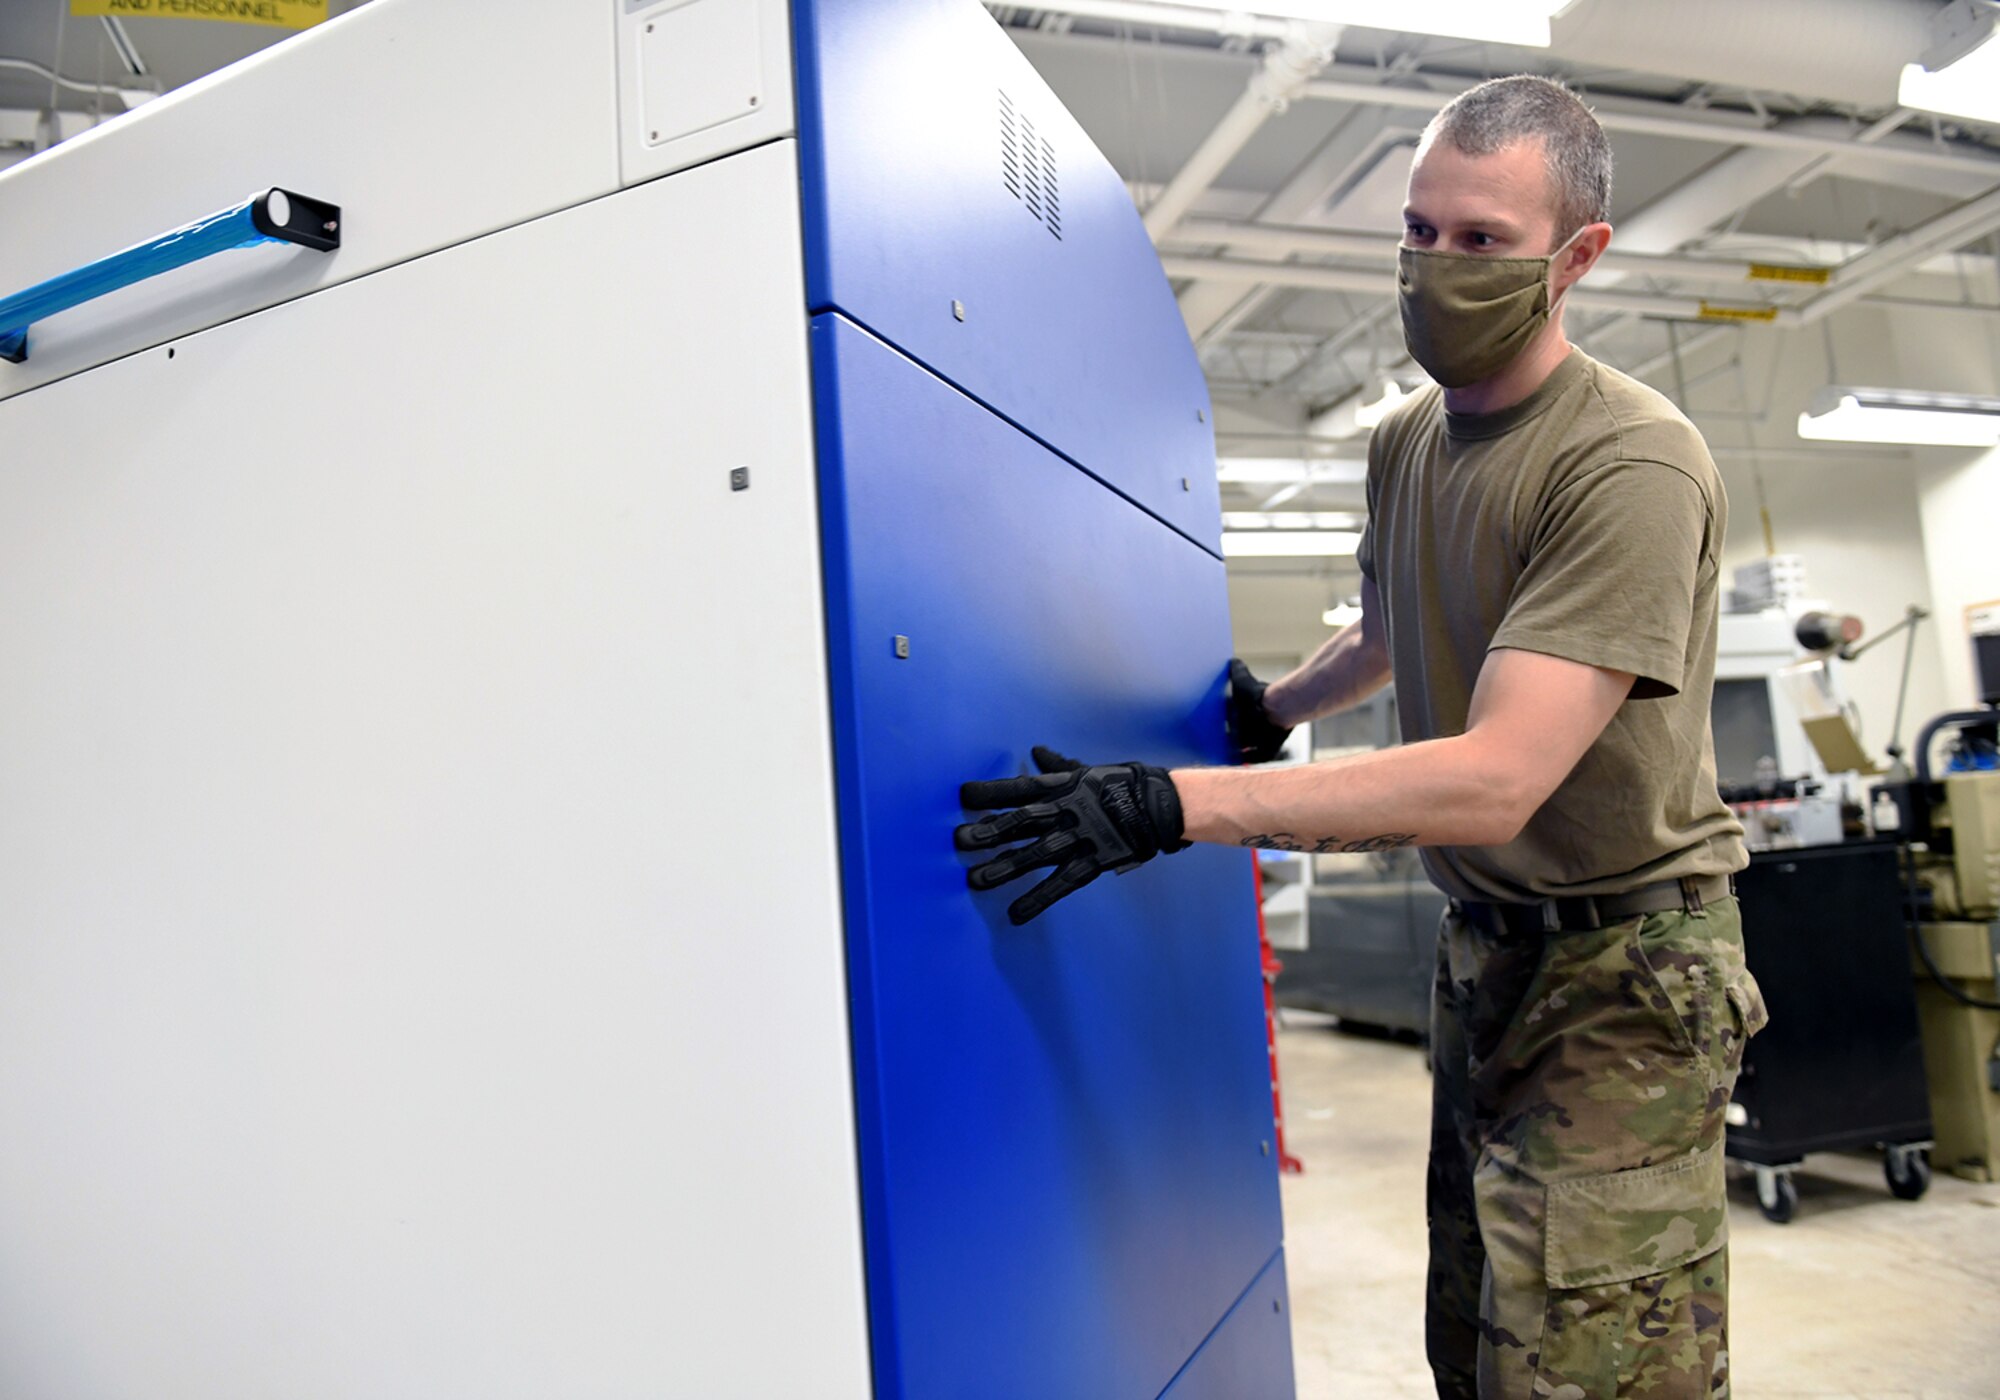 Texas National Guard Staff Sgt. Joshua Turner, 149th Maintenance Squadron aircraft metals technician, moves a newly delivered 3D printer into place at his unit’s shop Aug. 12, 2020, at Joint Base San Antonio-Lackland, Texas.